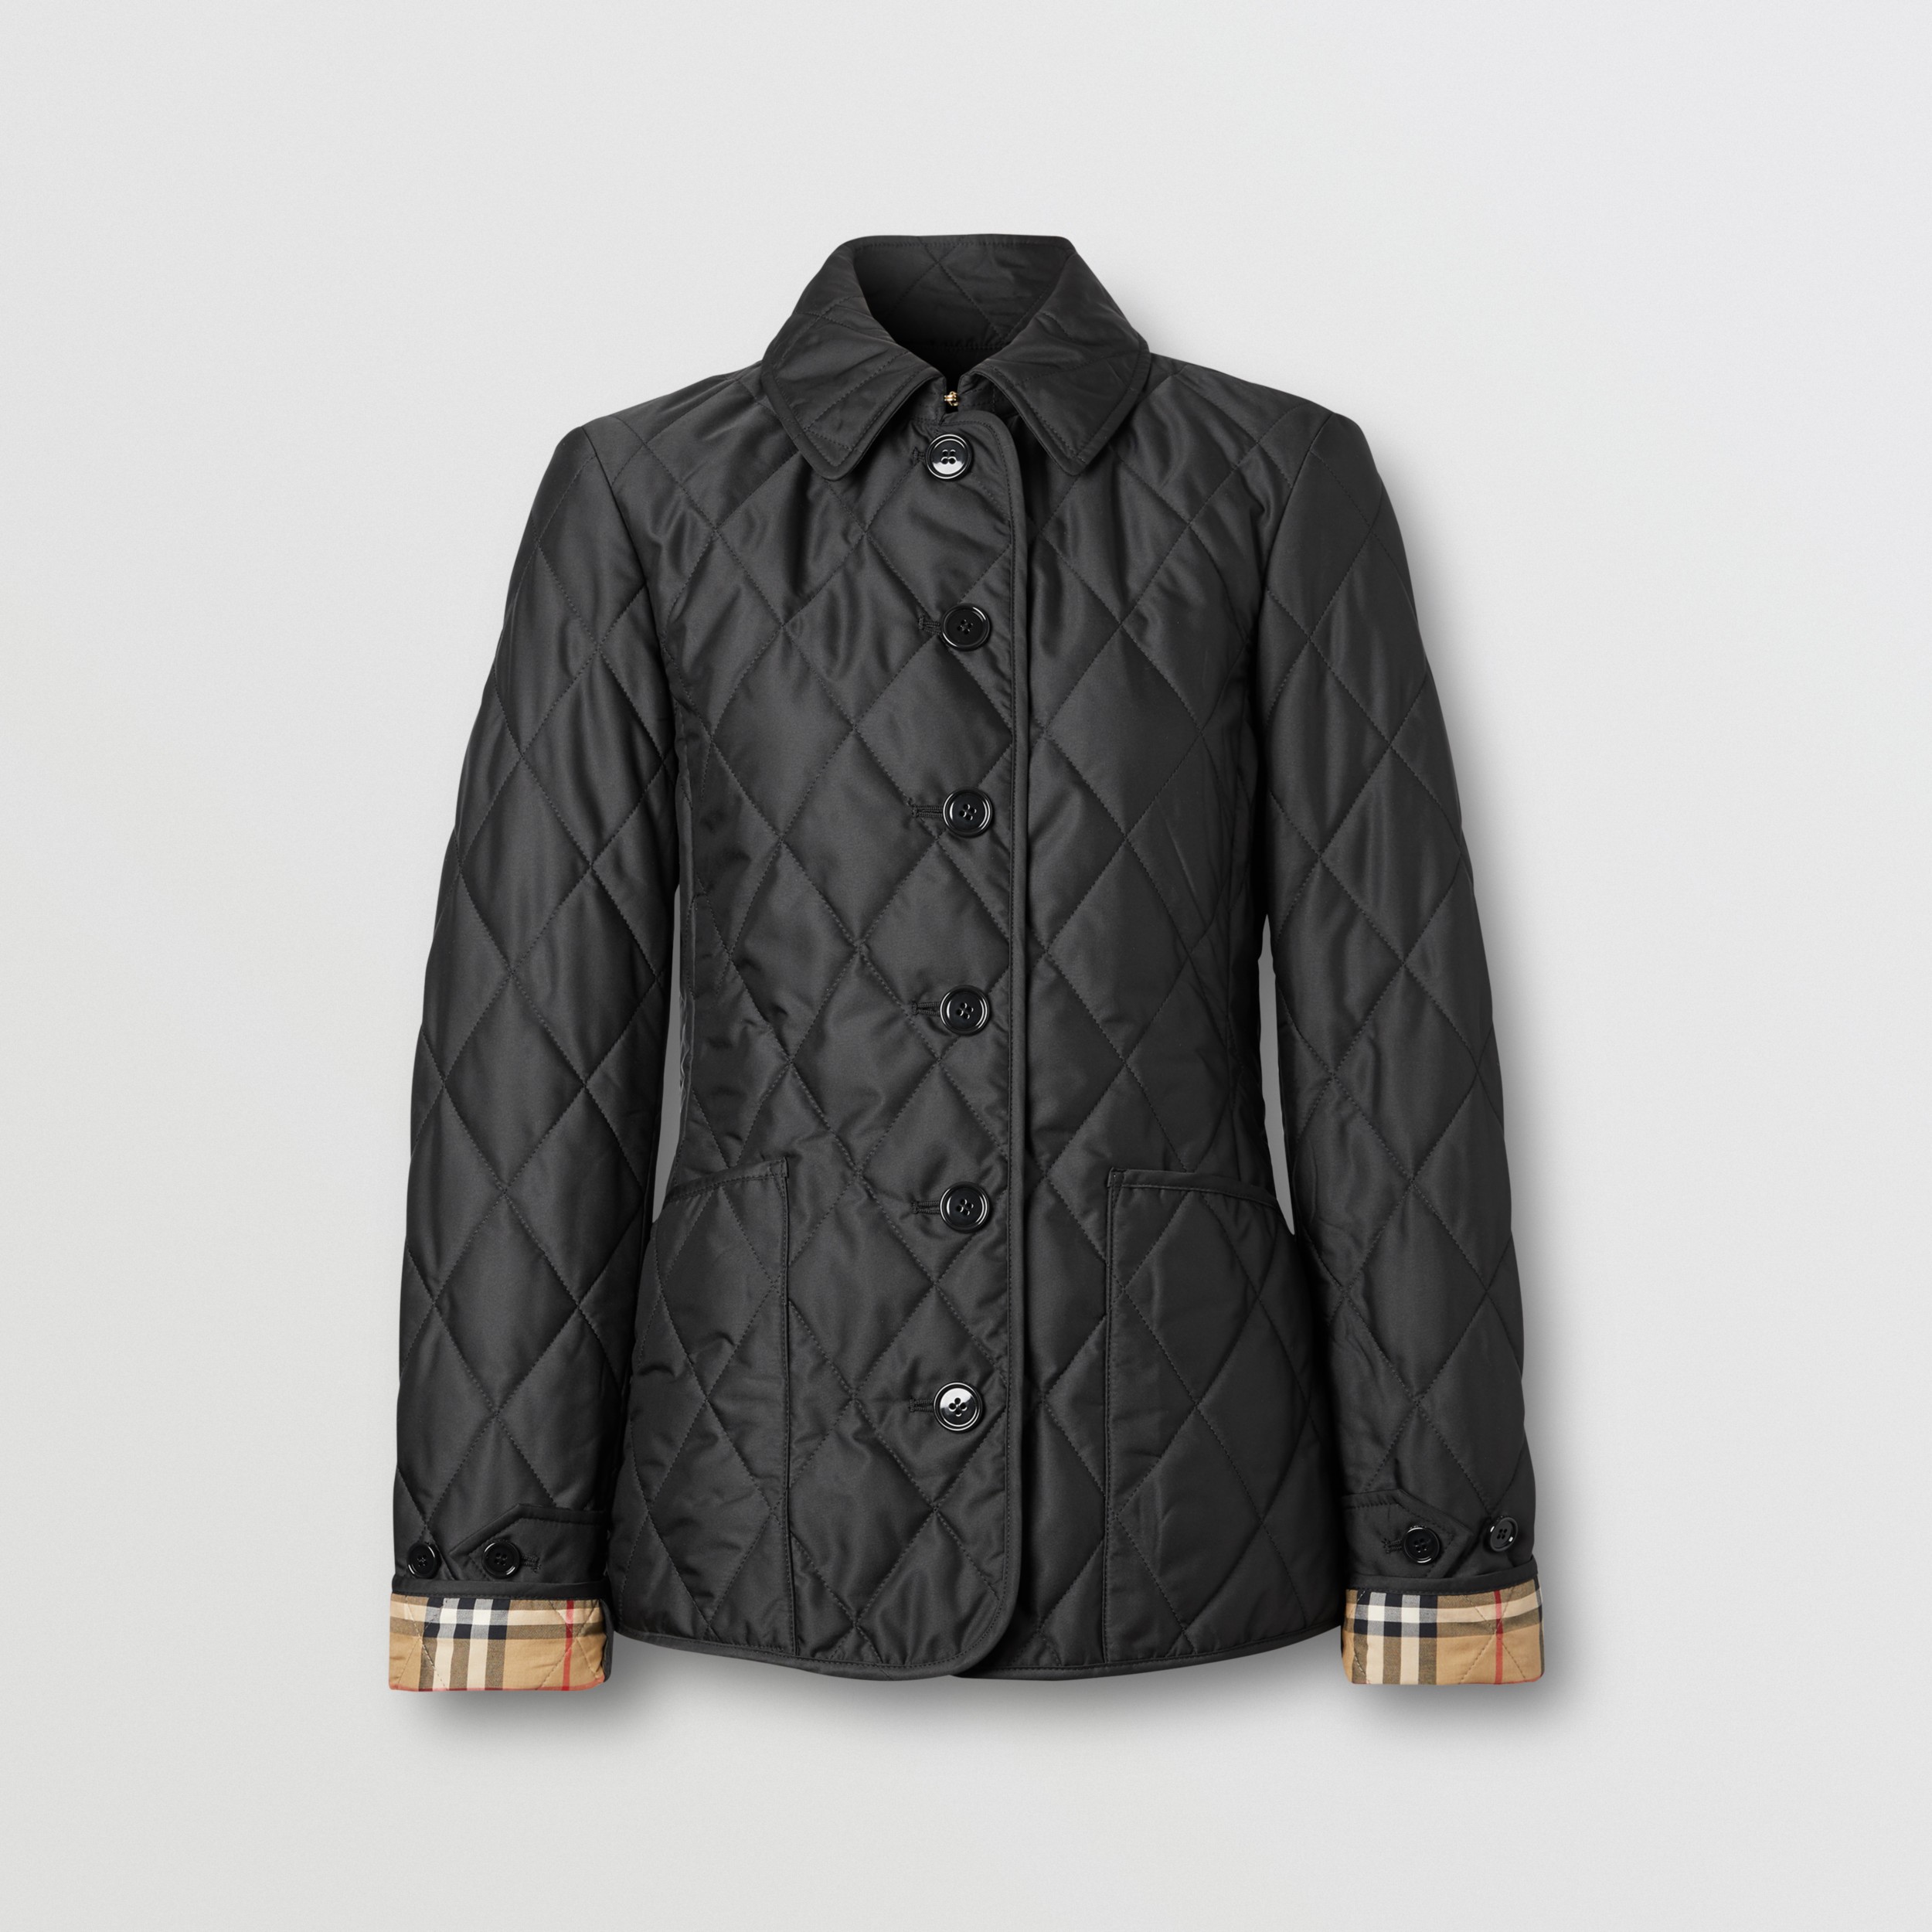 Arriba 76+ imagen diamond quilted thermoregulated jacket burberry